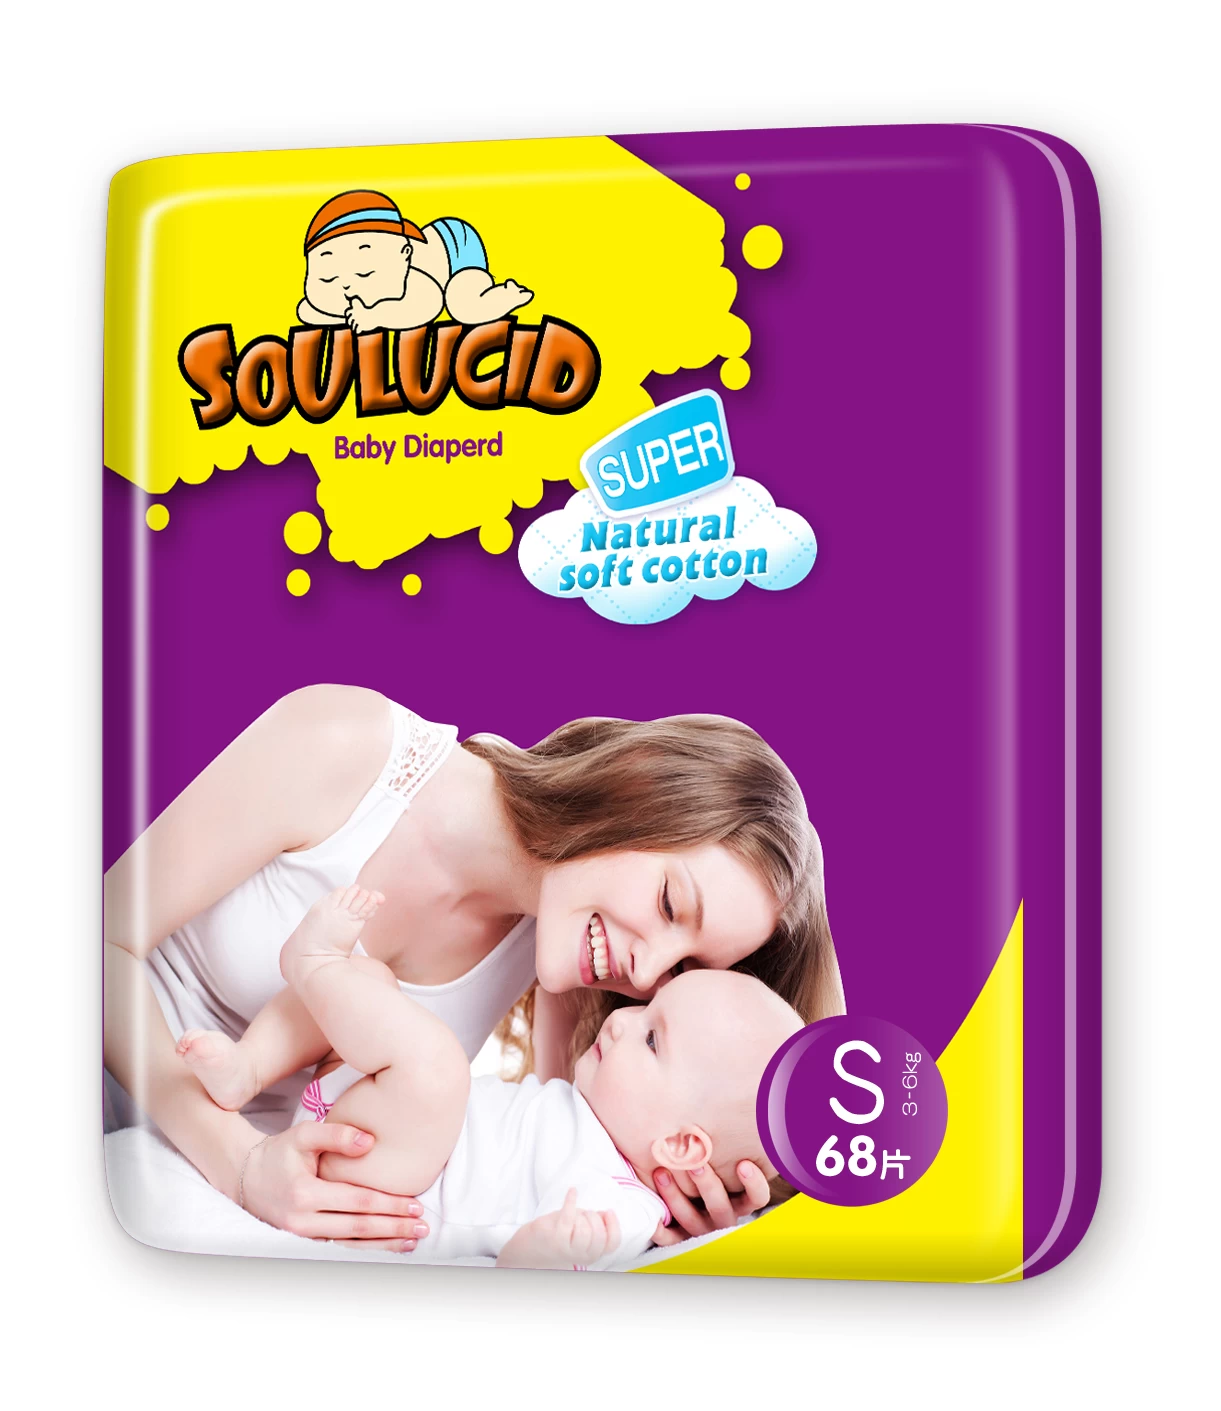 Souluicd Disposable Baby Diapers Wholesale High Quality  Baby Diapers